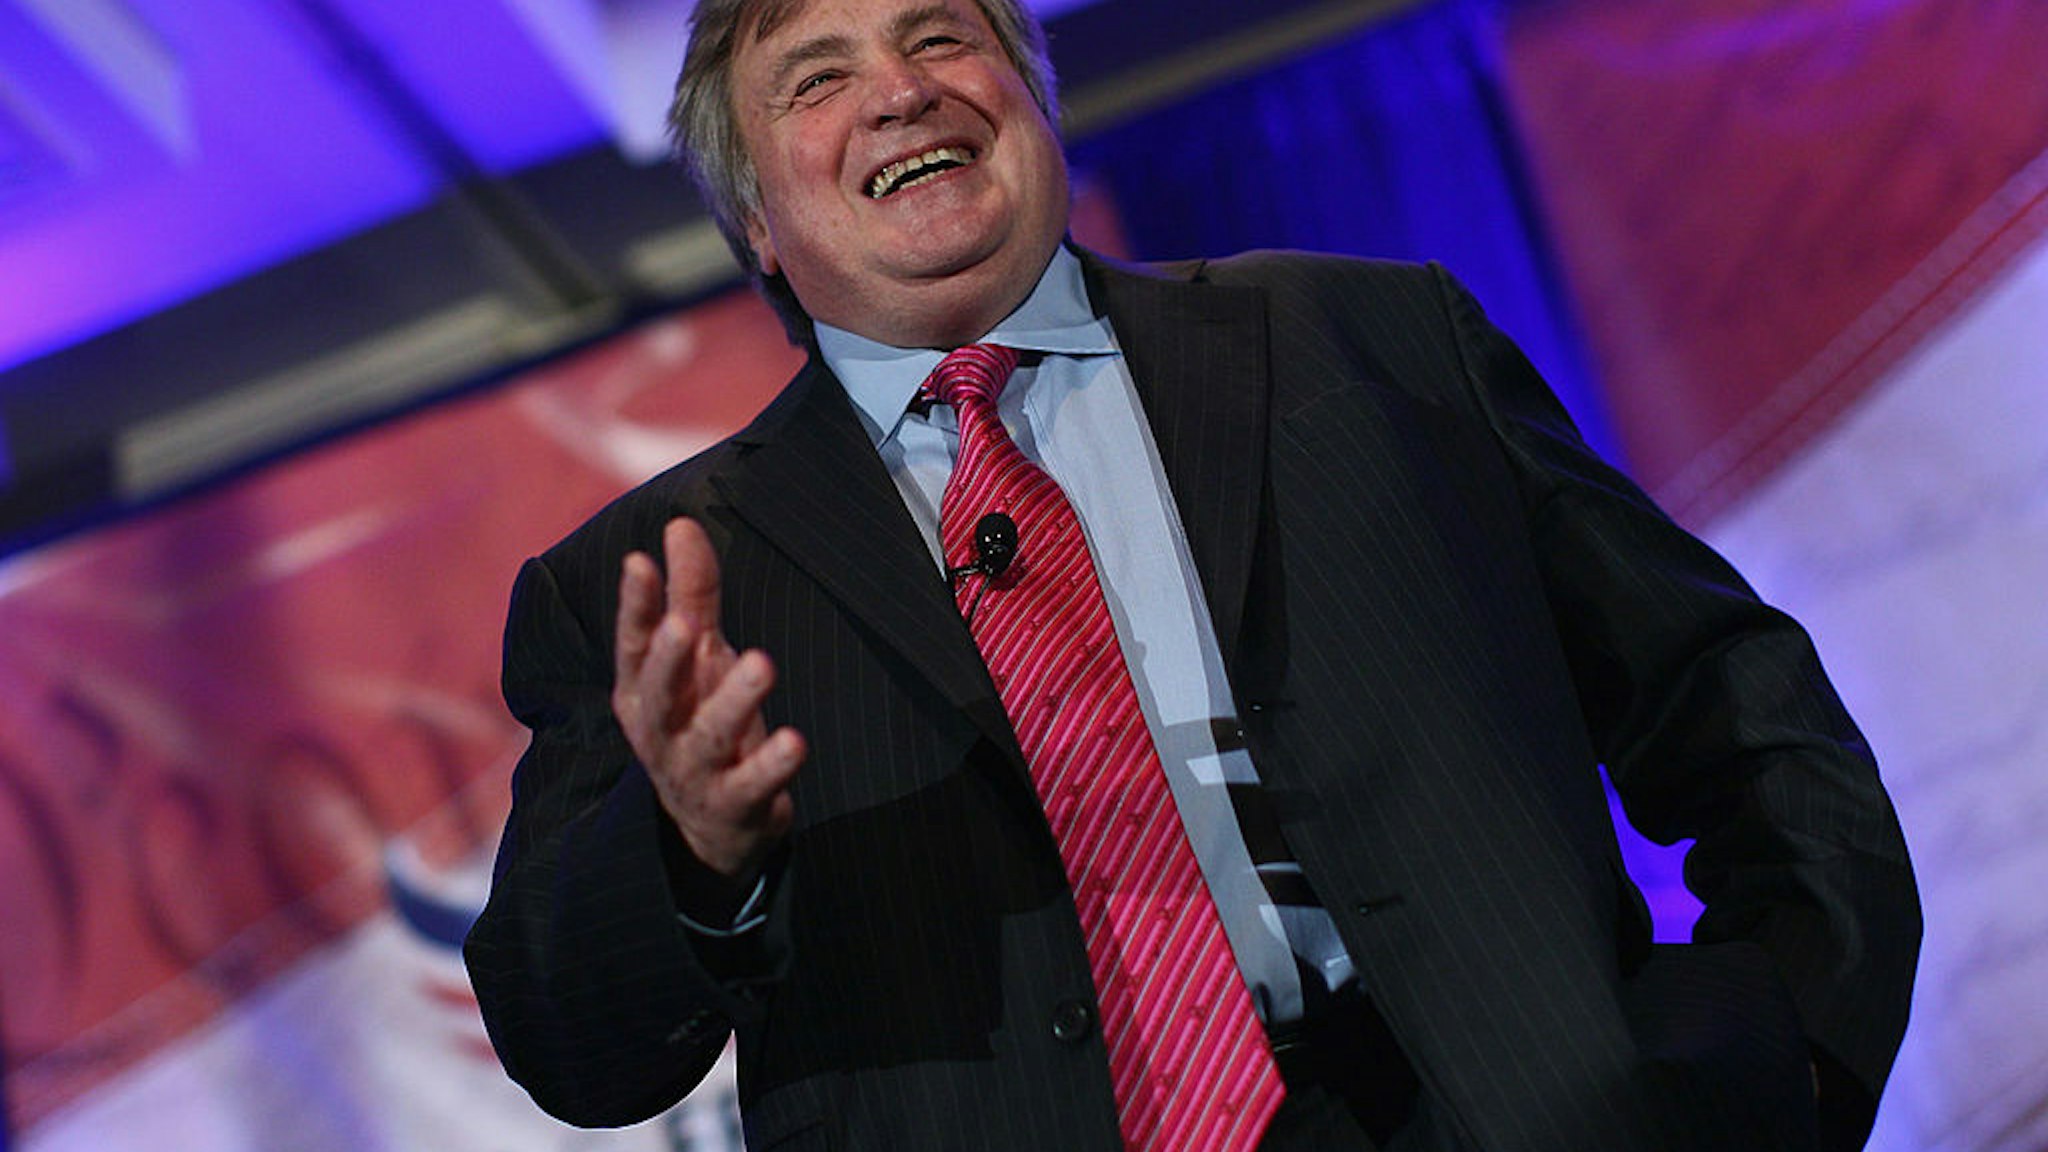 WASHINGTON, DC - JUNE 03: Political strategist Dick Morris addresses the Faith and Freedom Coalition June 3, 2011 in Washington, DC. The Faith and Freedom Coalition is holding their second annual conference and strategy briefing over two days in the nation's capital. (Photo by Win McNamee/Getty Images)